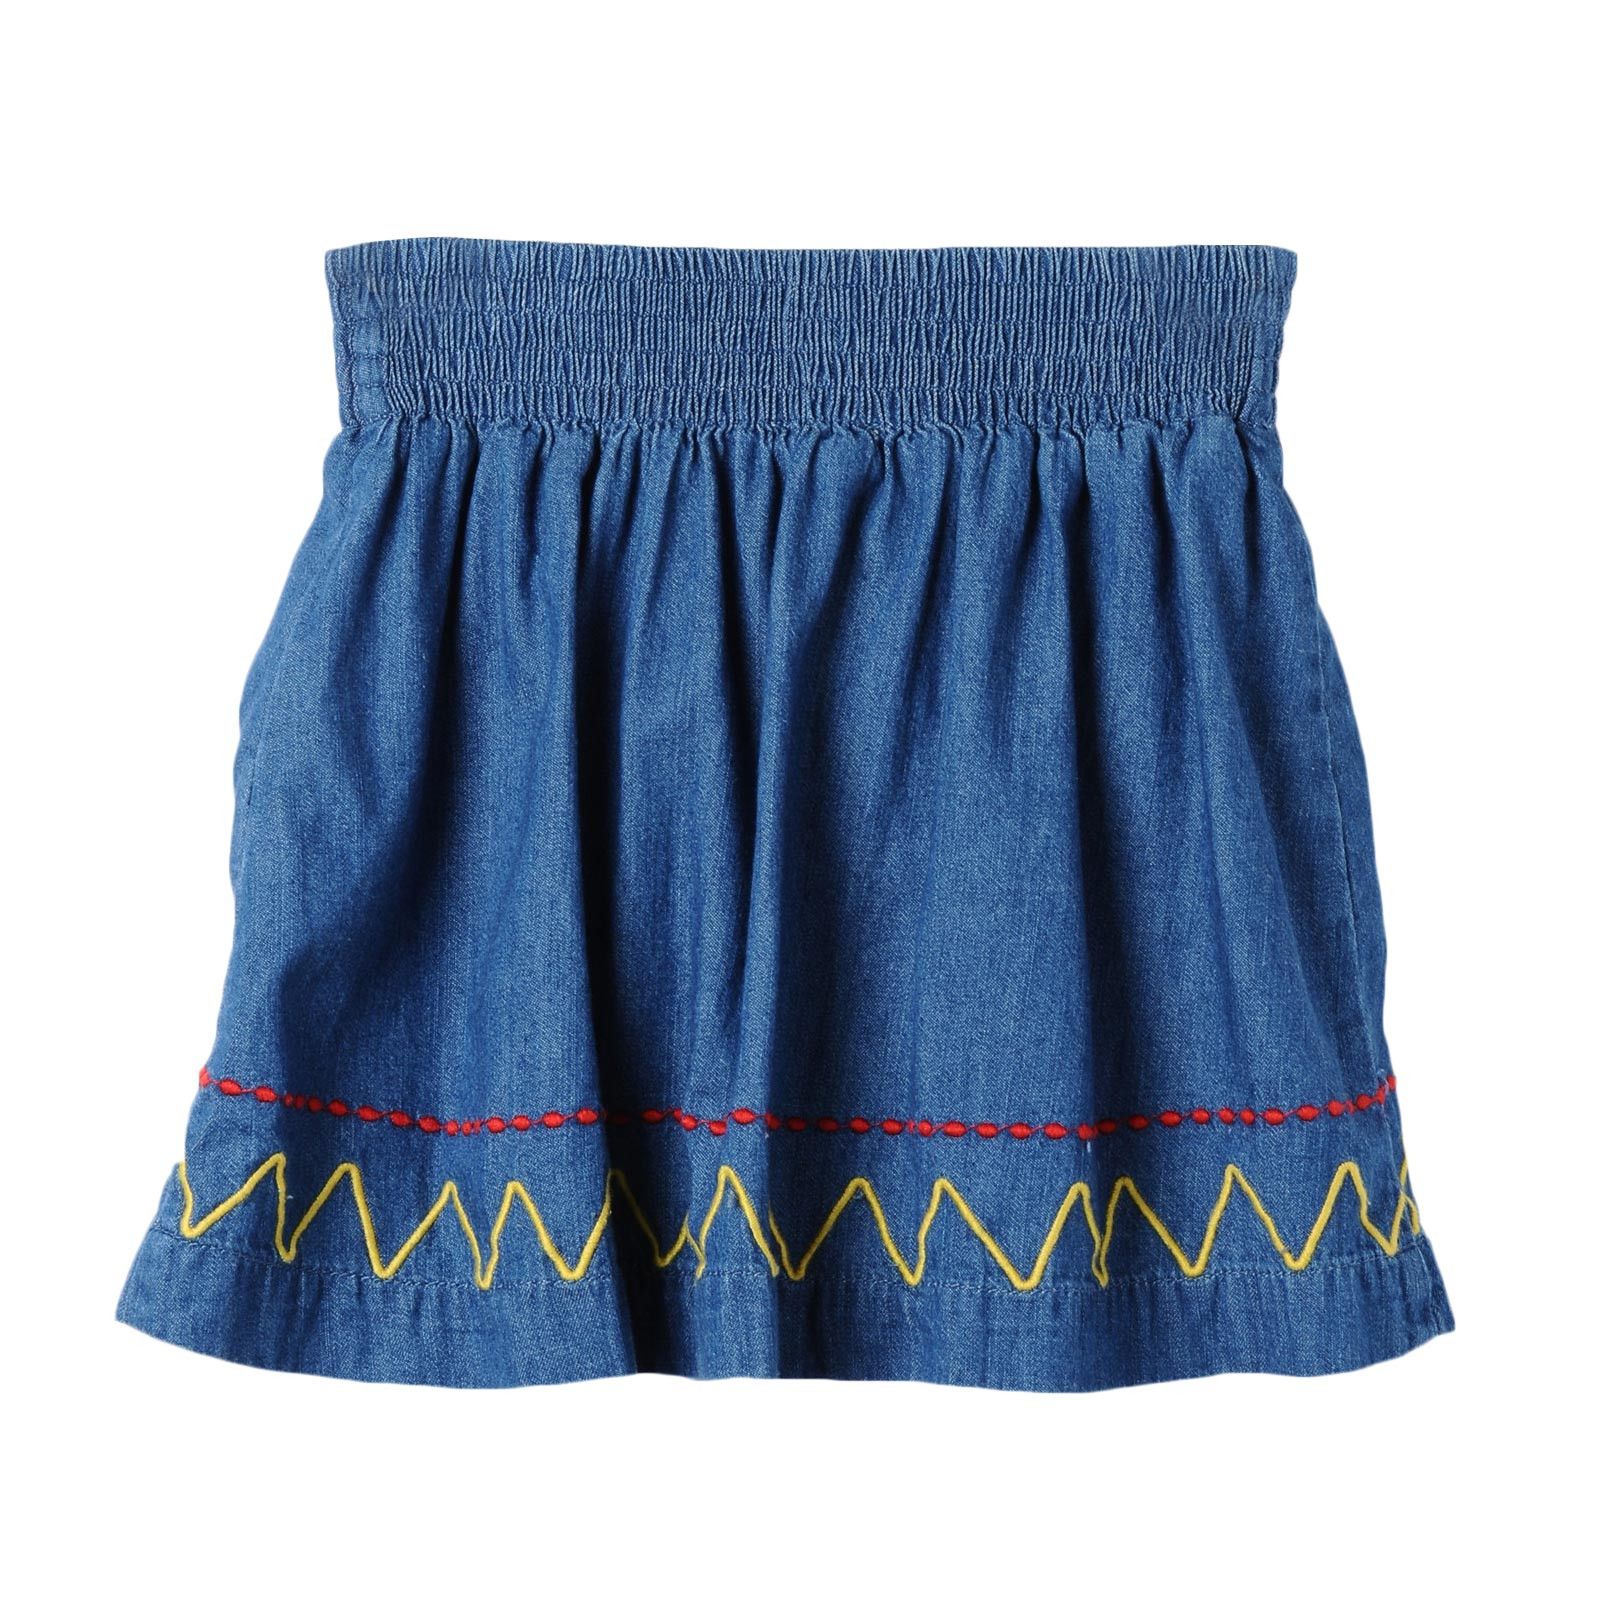 Girls Blue Denim Chambray Skirt With Colorful Zig Zag Embroidered Trims - CÉMAROSE | Children's Fashion Store - 2